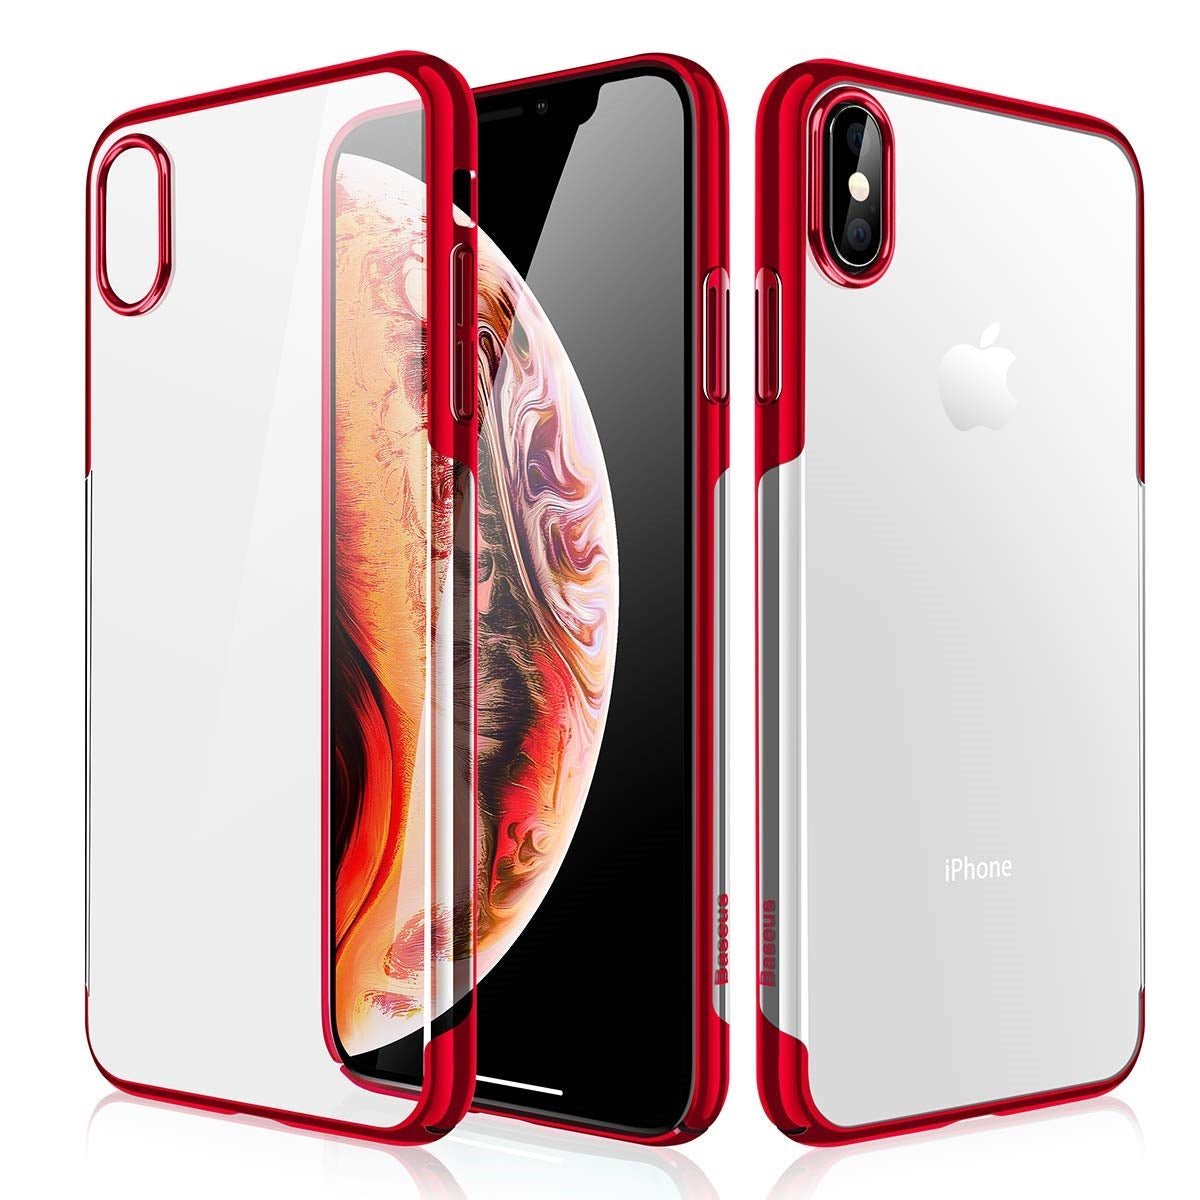 iPhone Xs Max 6.5'' 2018 Clear Case, AICase Shinning Electroplating Design PC Bumper Clear Back Protective Cover Bumper for Apple iPhone Xs Max 6.5